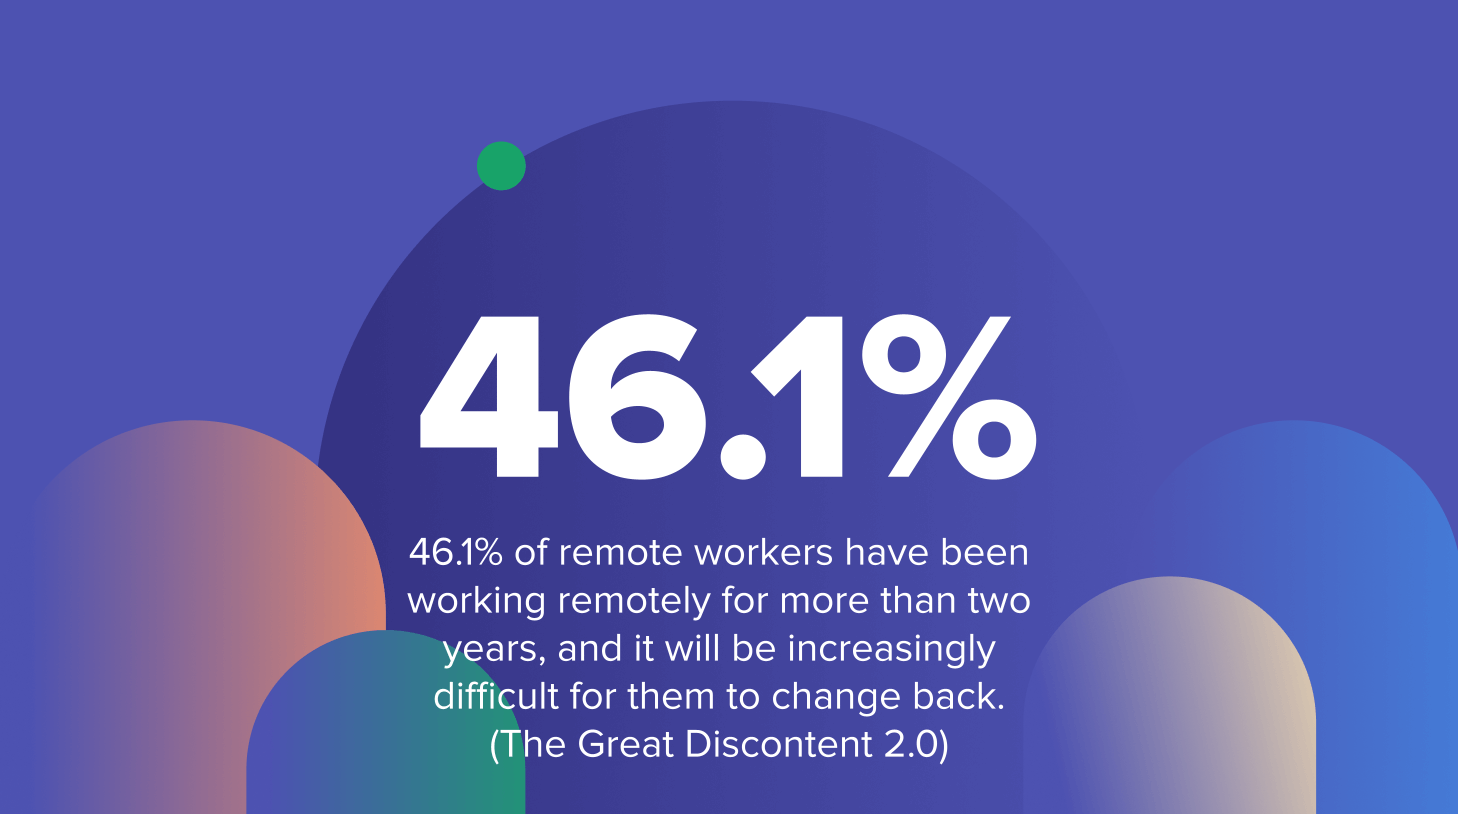 46.1% of remote workers have been working remotely for more than two years, and it will be increasingly difficult for them to change back. 
(The Great Discontent 2.0)
